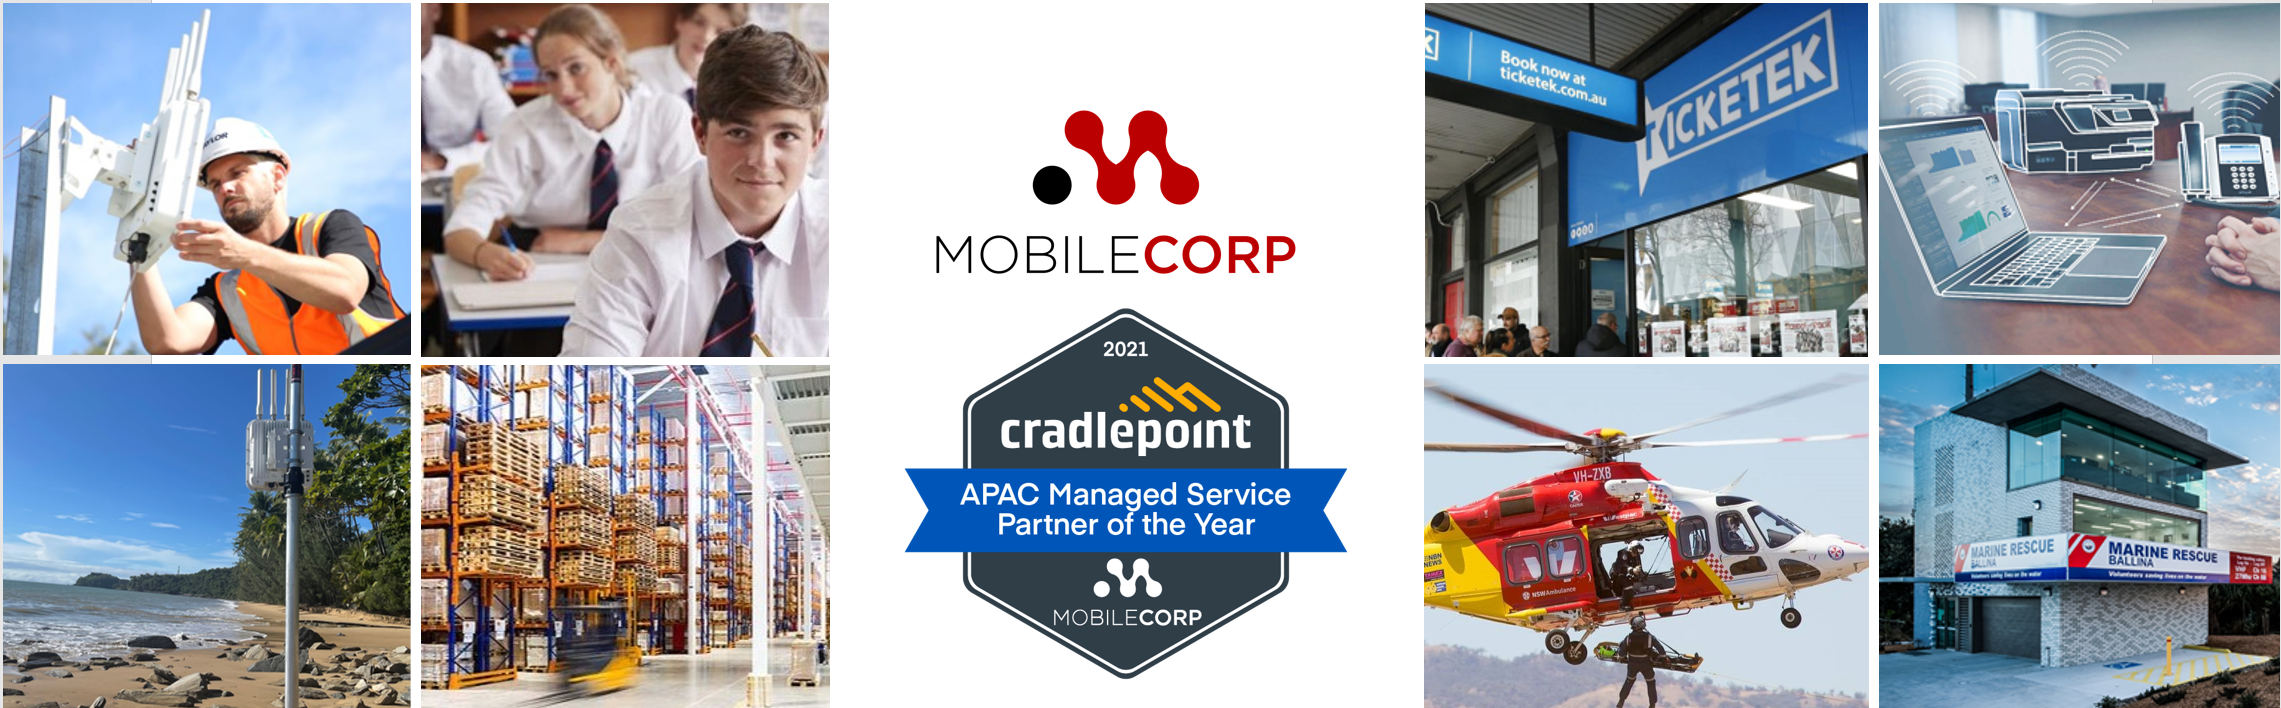 MobileCorp Cradlepoint MSP of the Year web banner